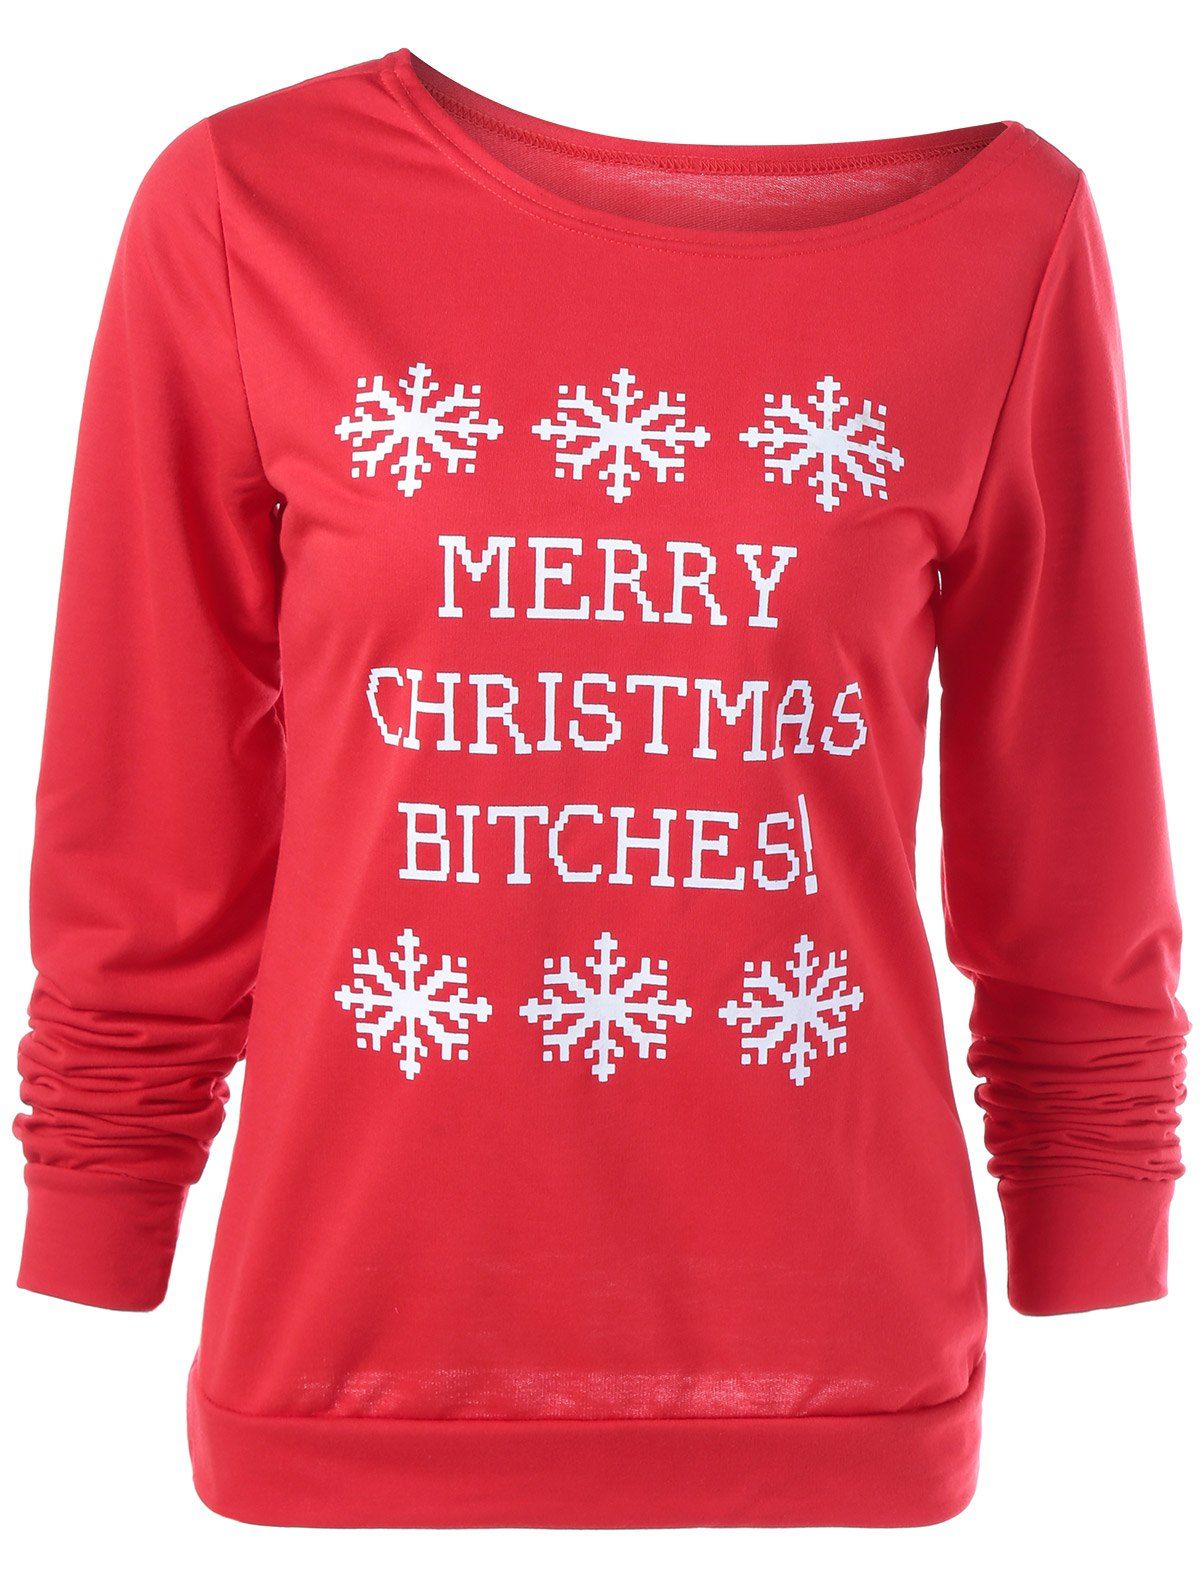 Merry Christmas Bitches Graphic Sweatshirt - RED XL